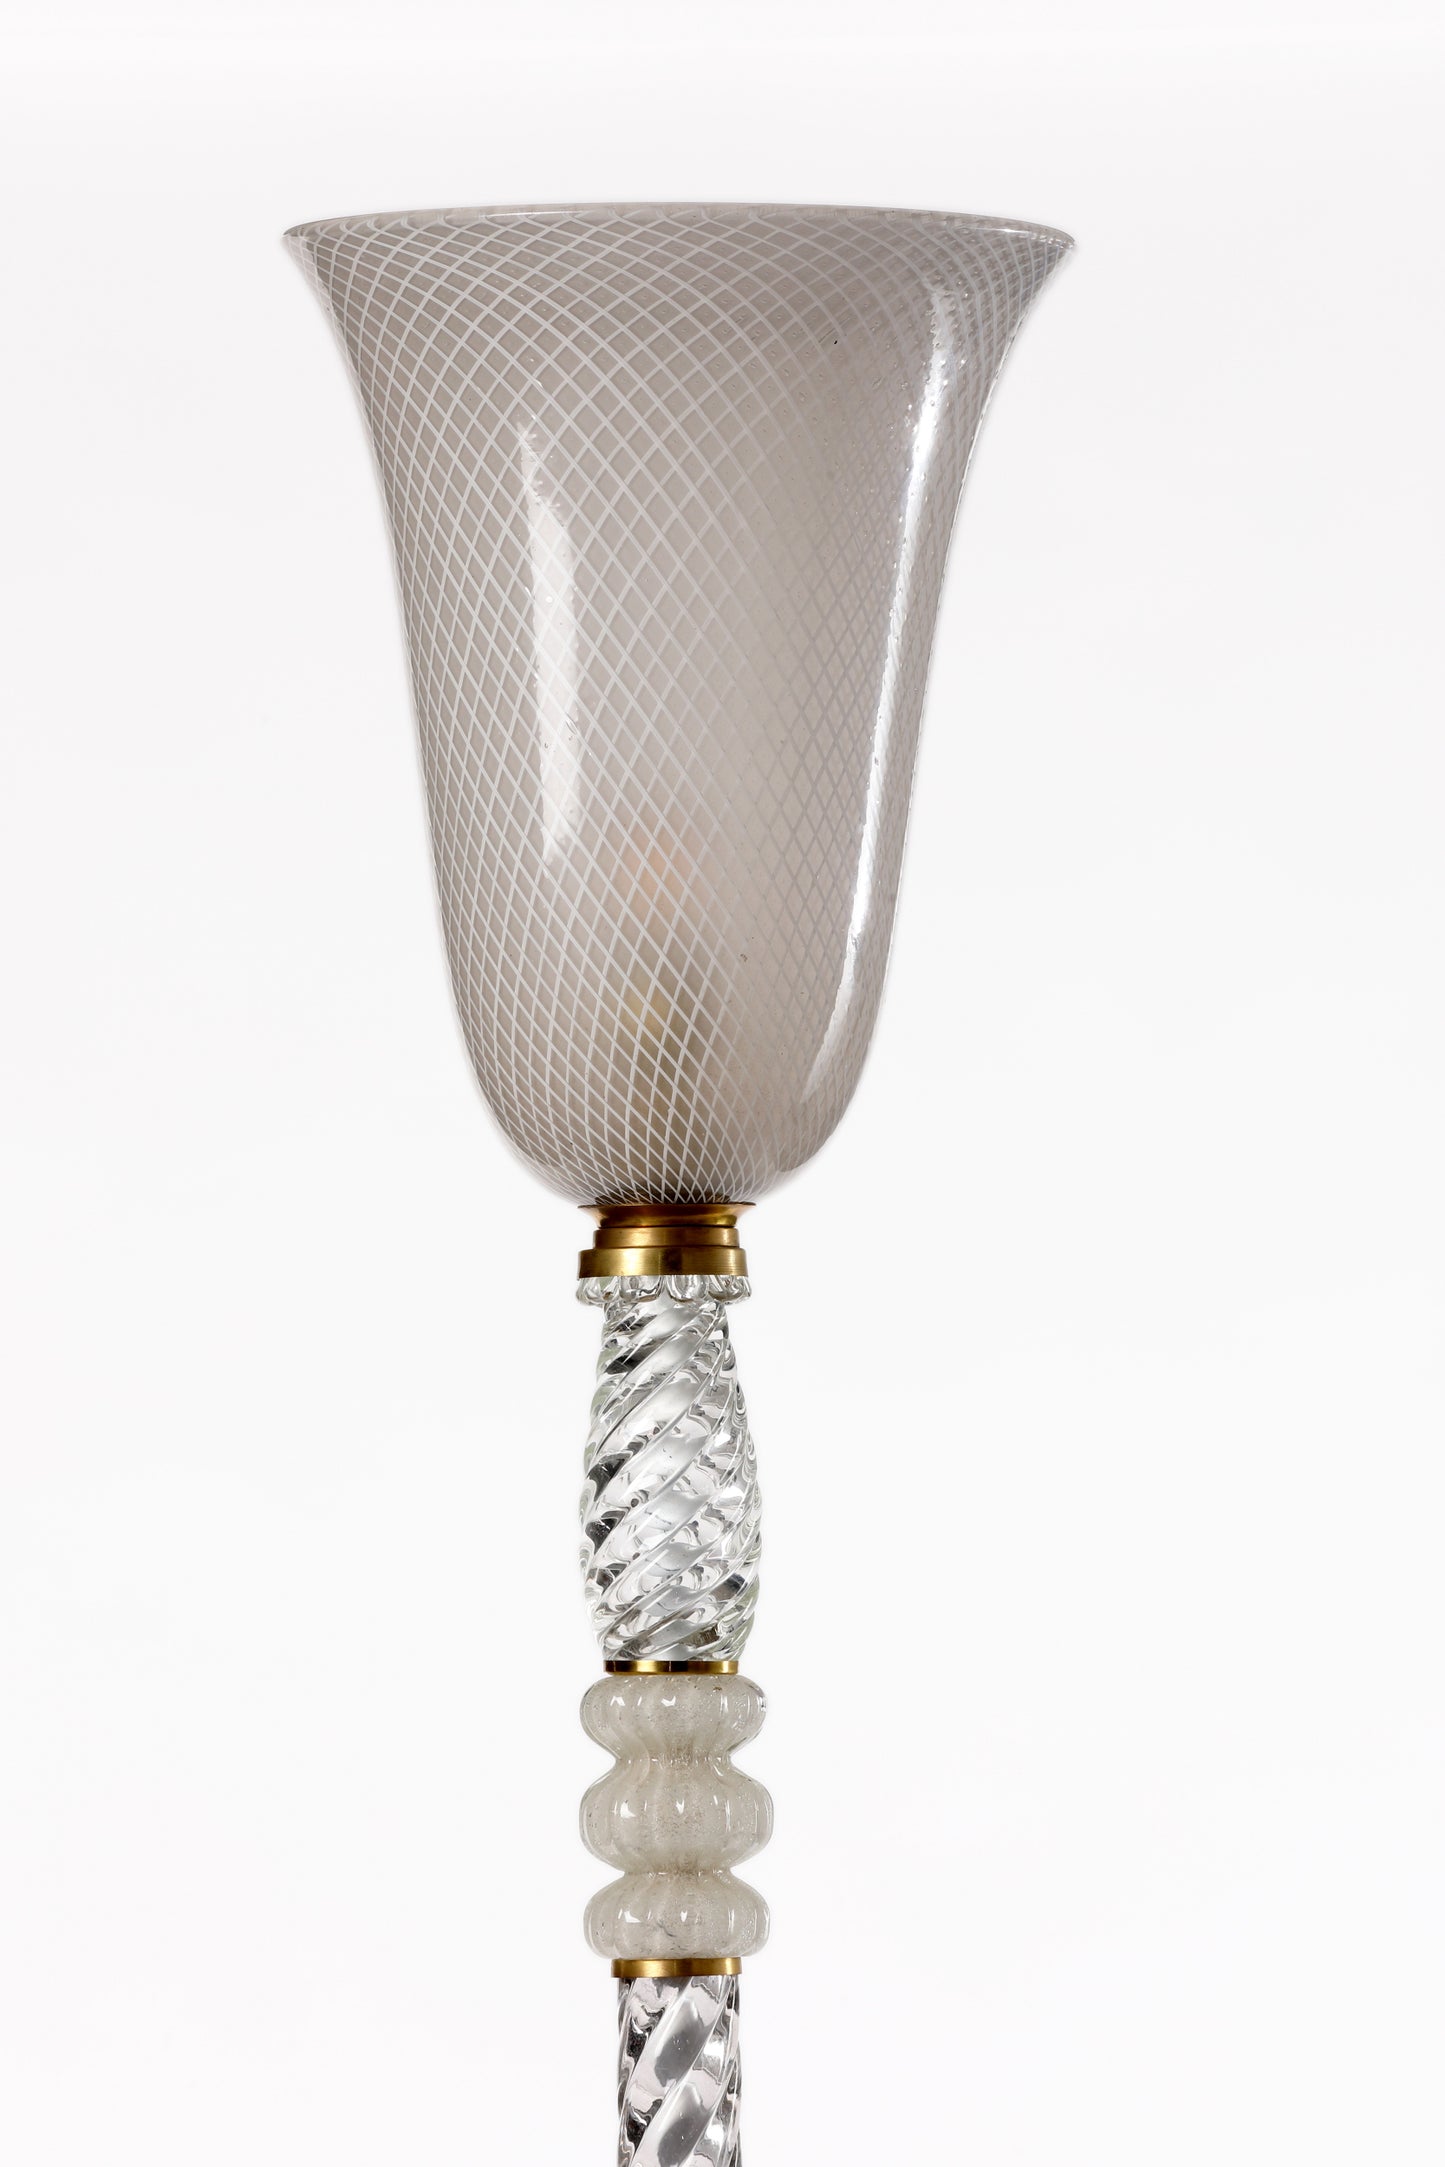 Murano glass floor lamp from the 30s